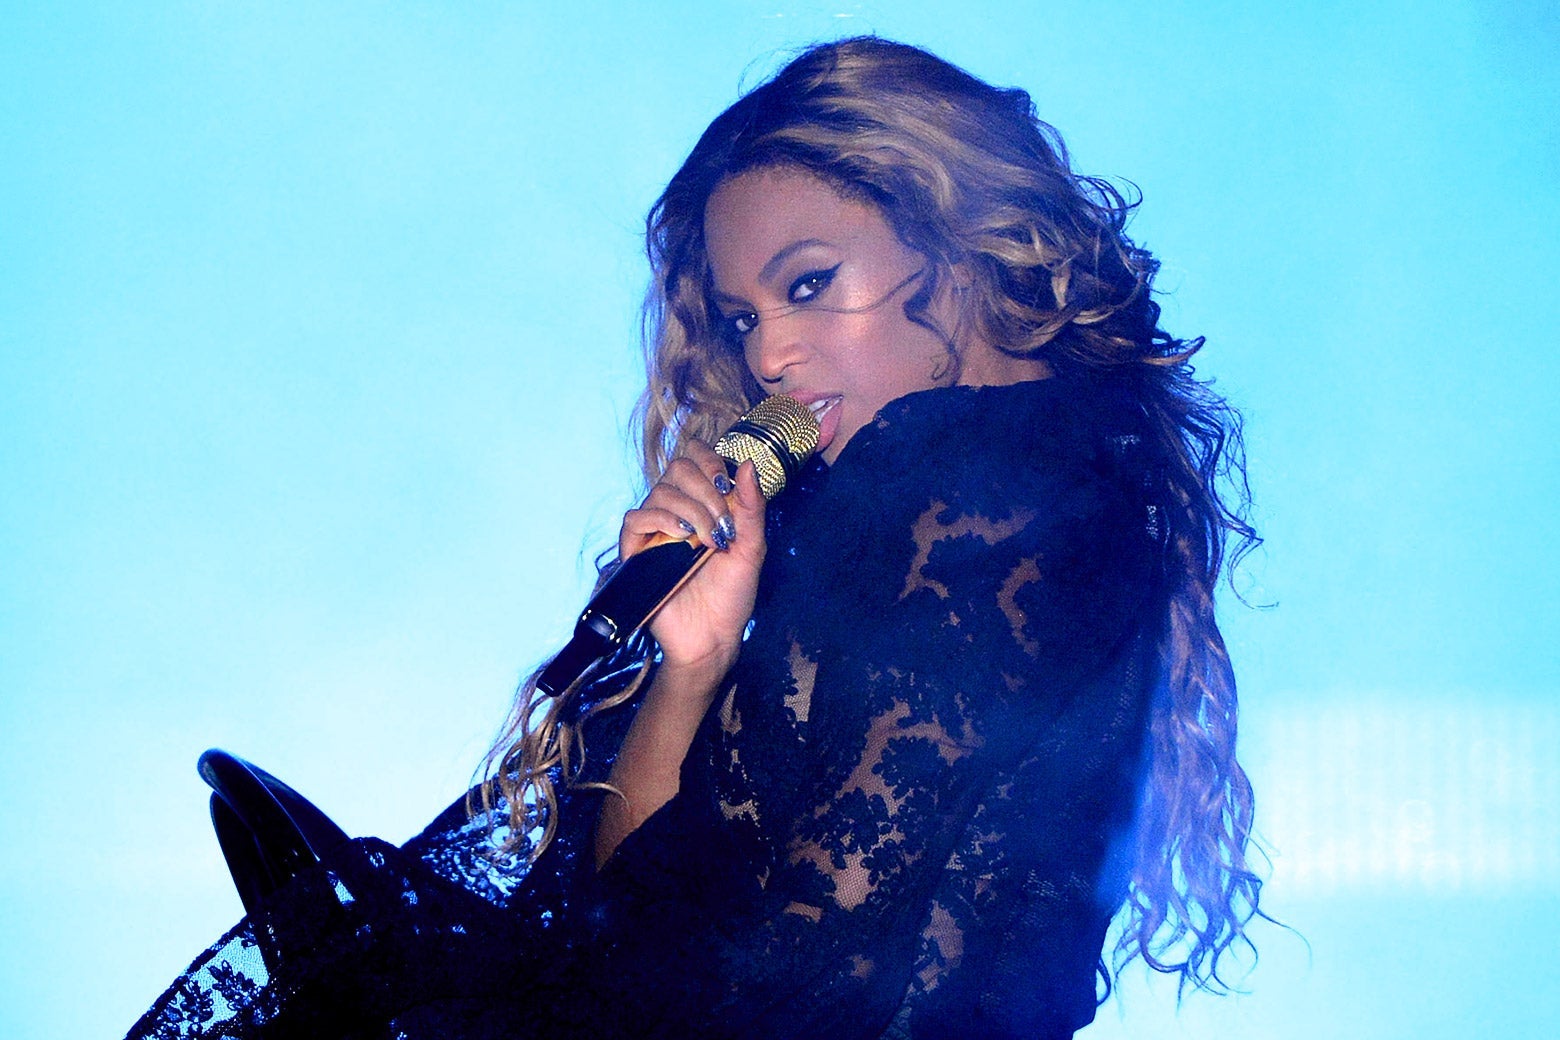 Beyoncé looks over her shoulder, singing into a gold microphone.